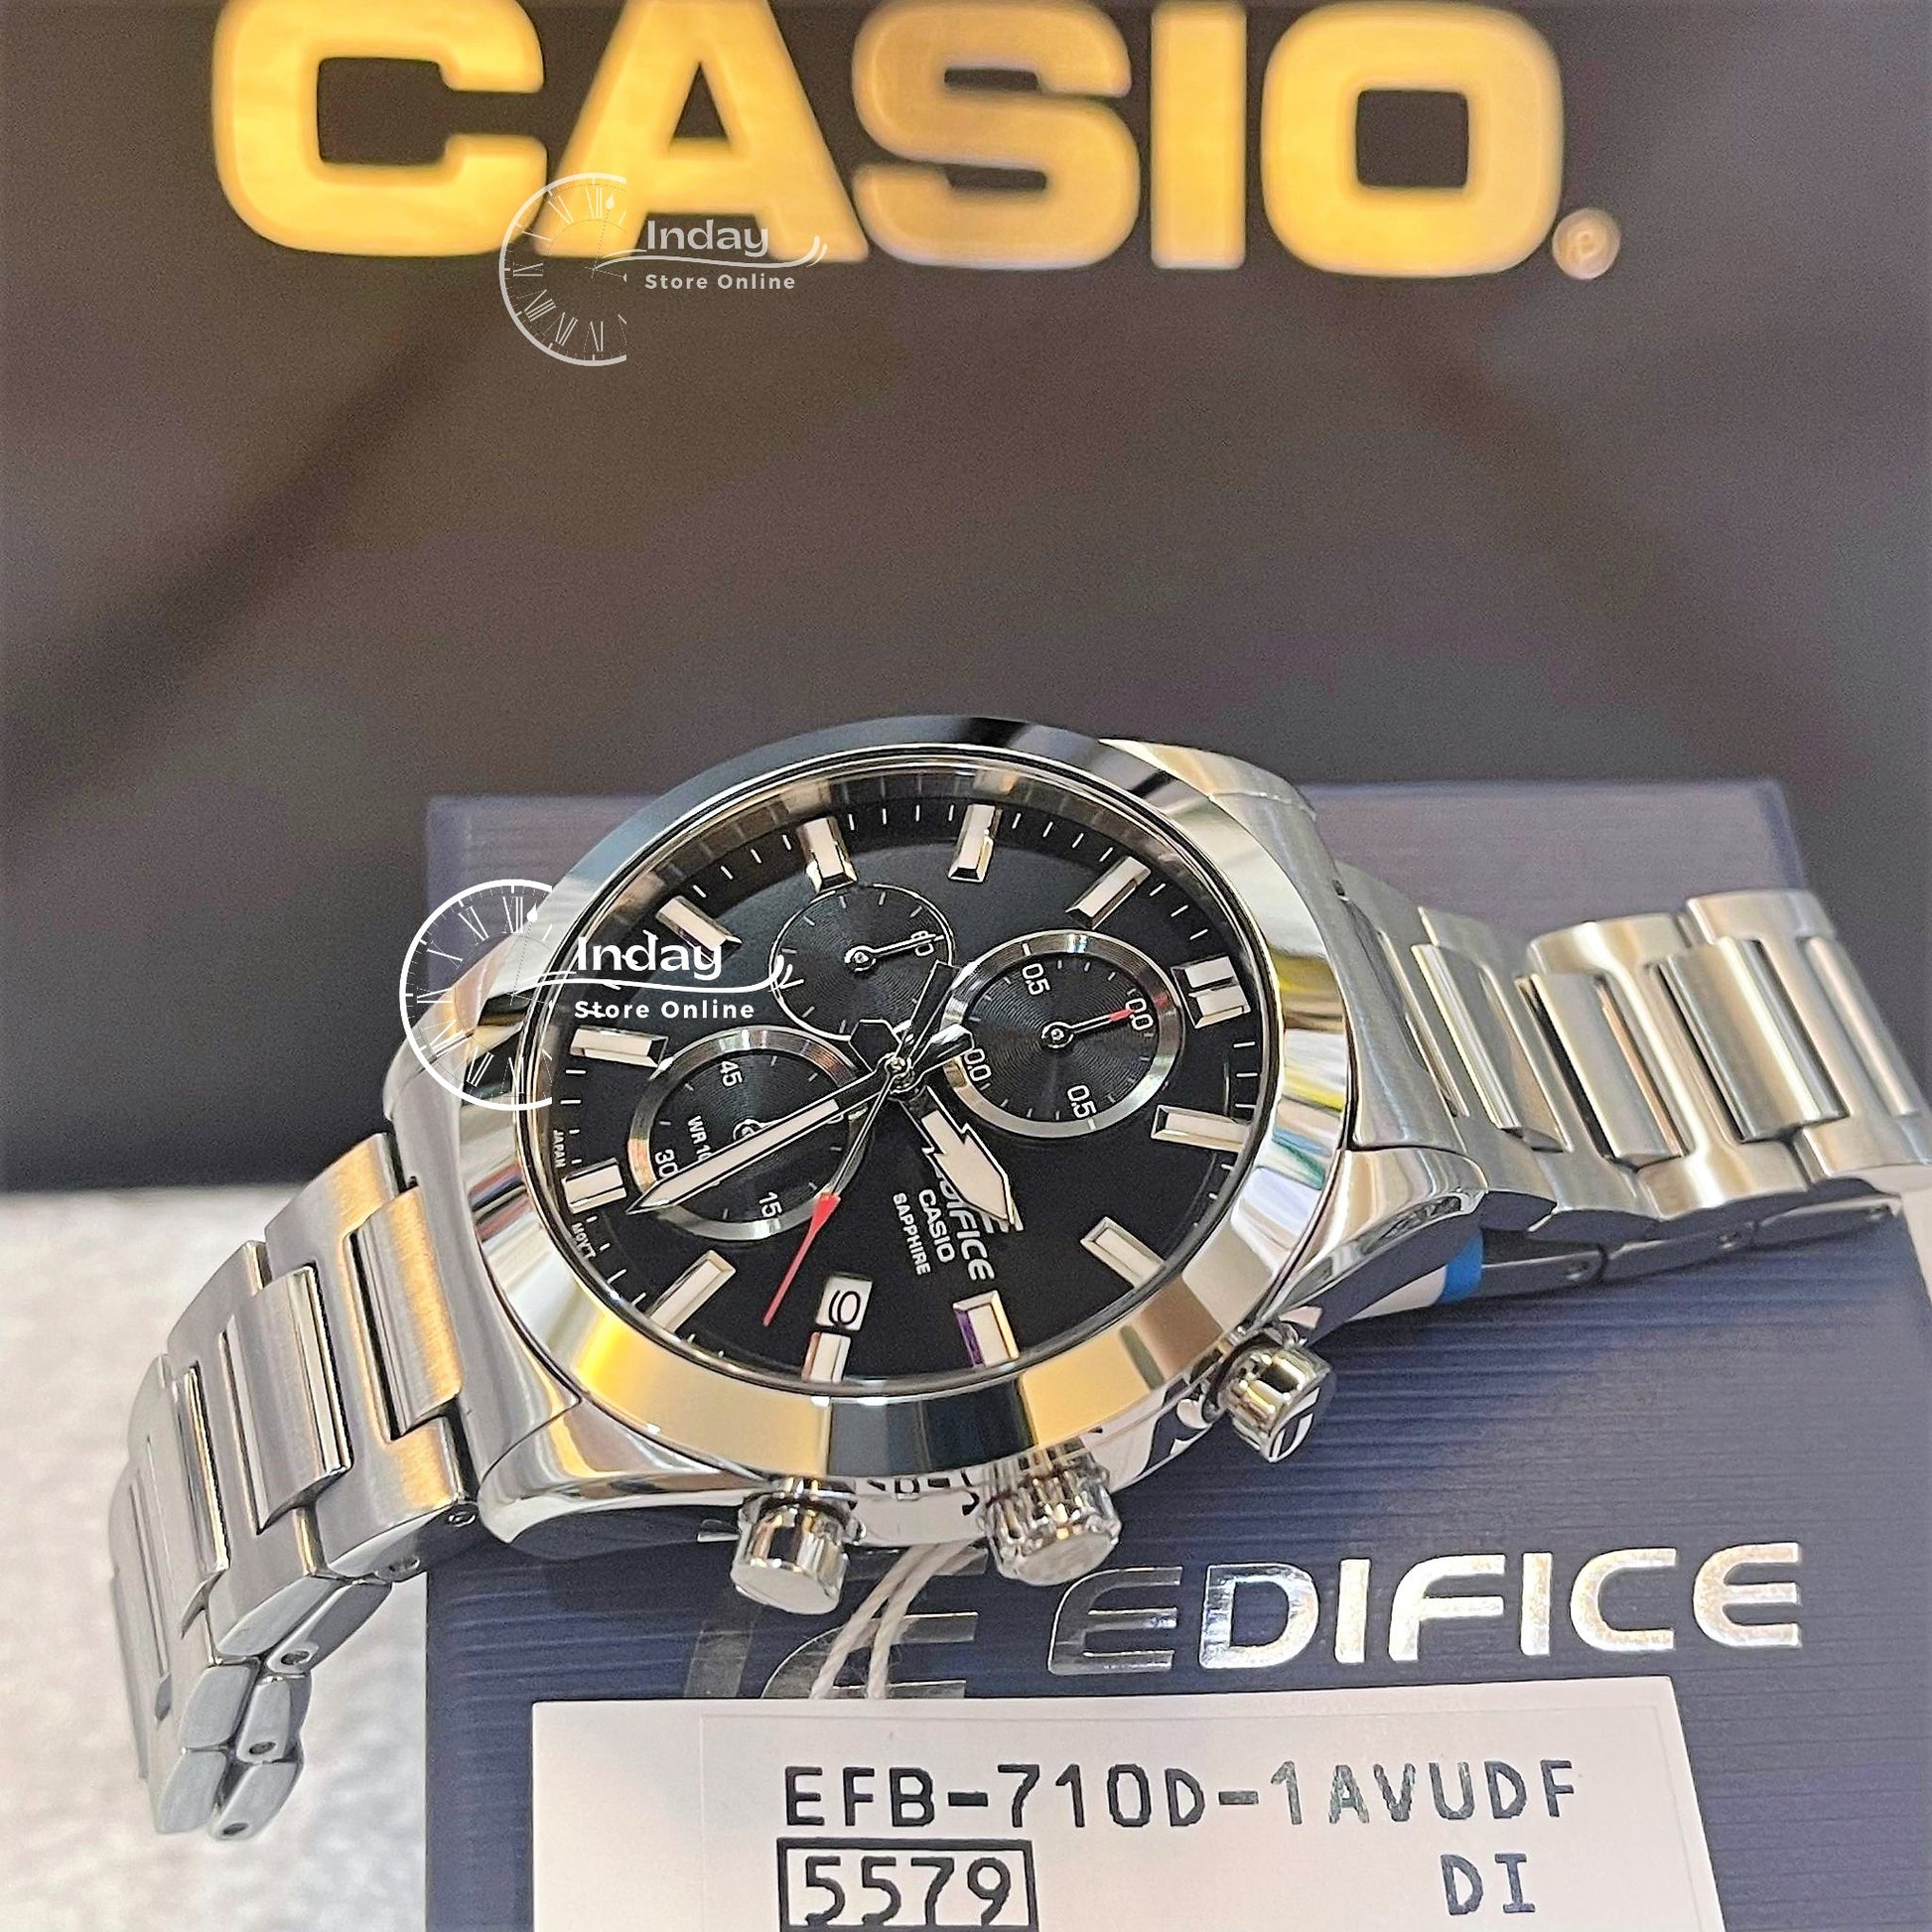 Casio Edifice Men\'s Watch EFB-710D-1A – indaystoreonline